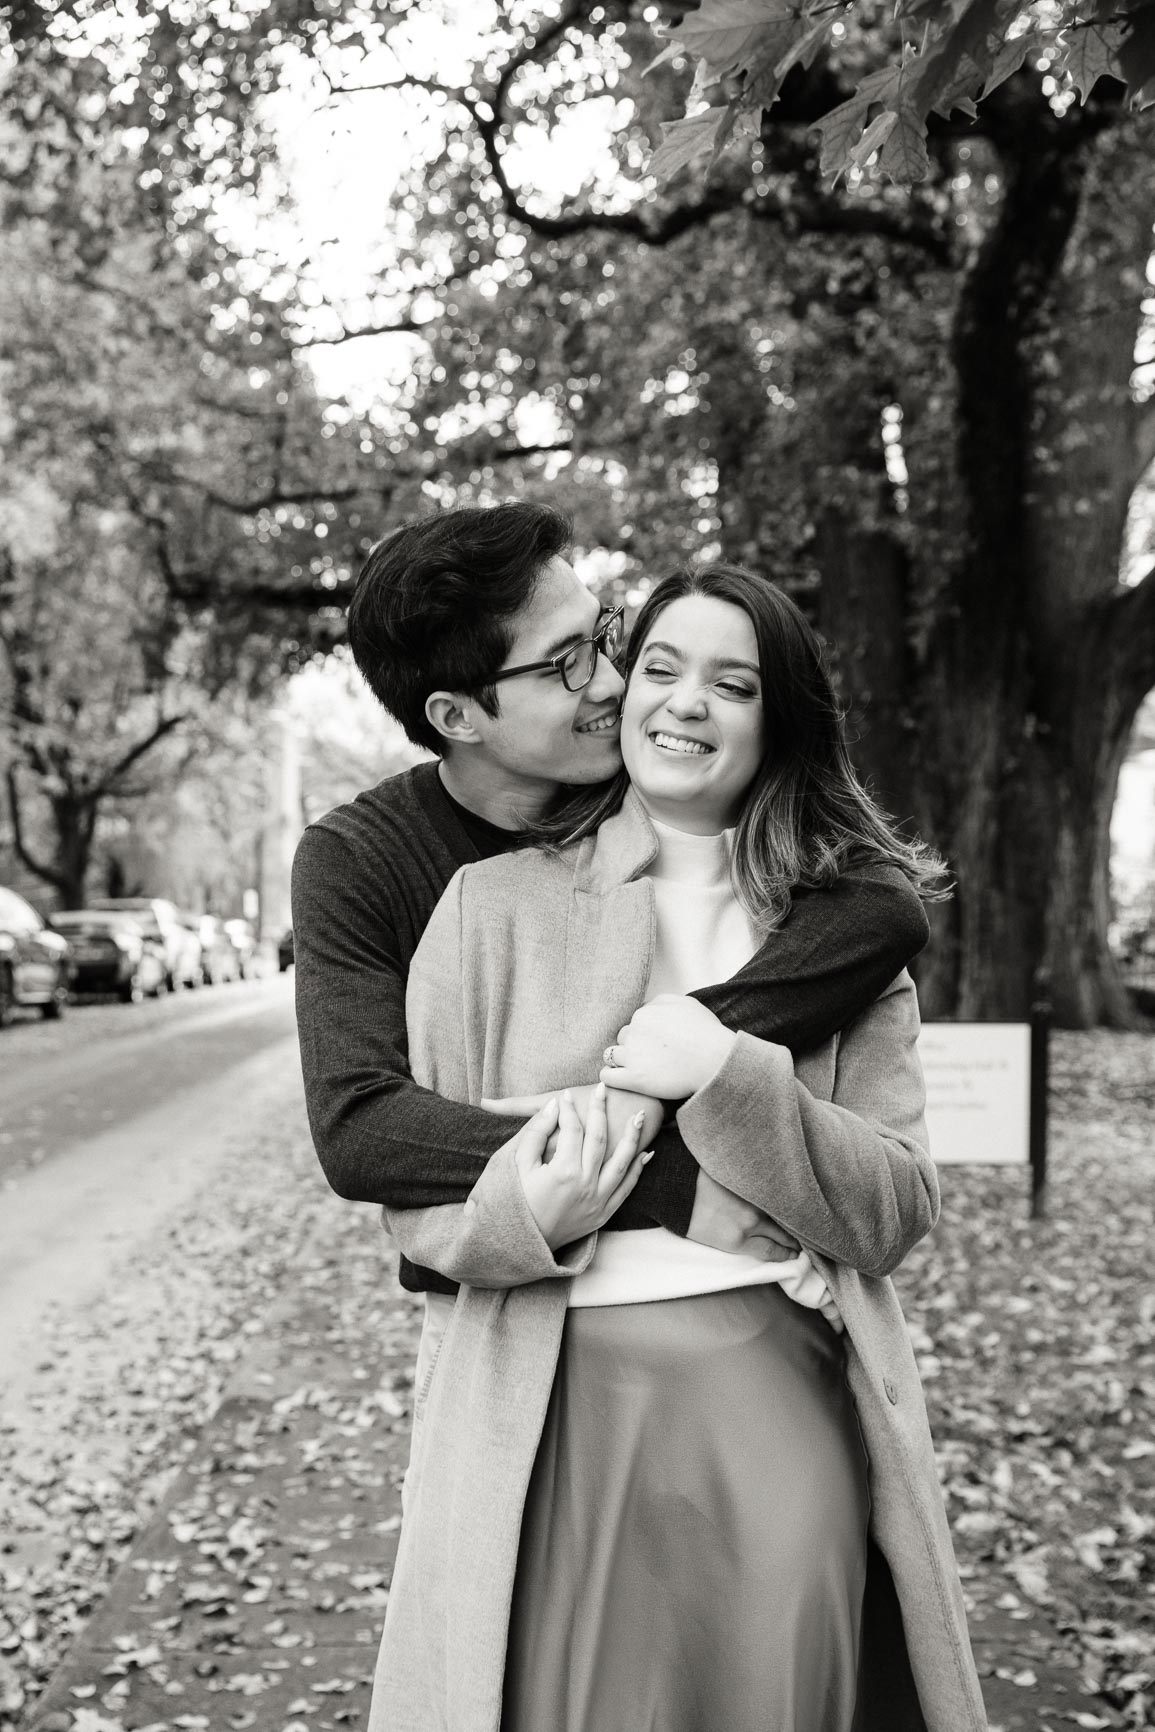 fall engagement photo in downtown asheville nc shot by Nhieu Tang Photography